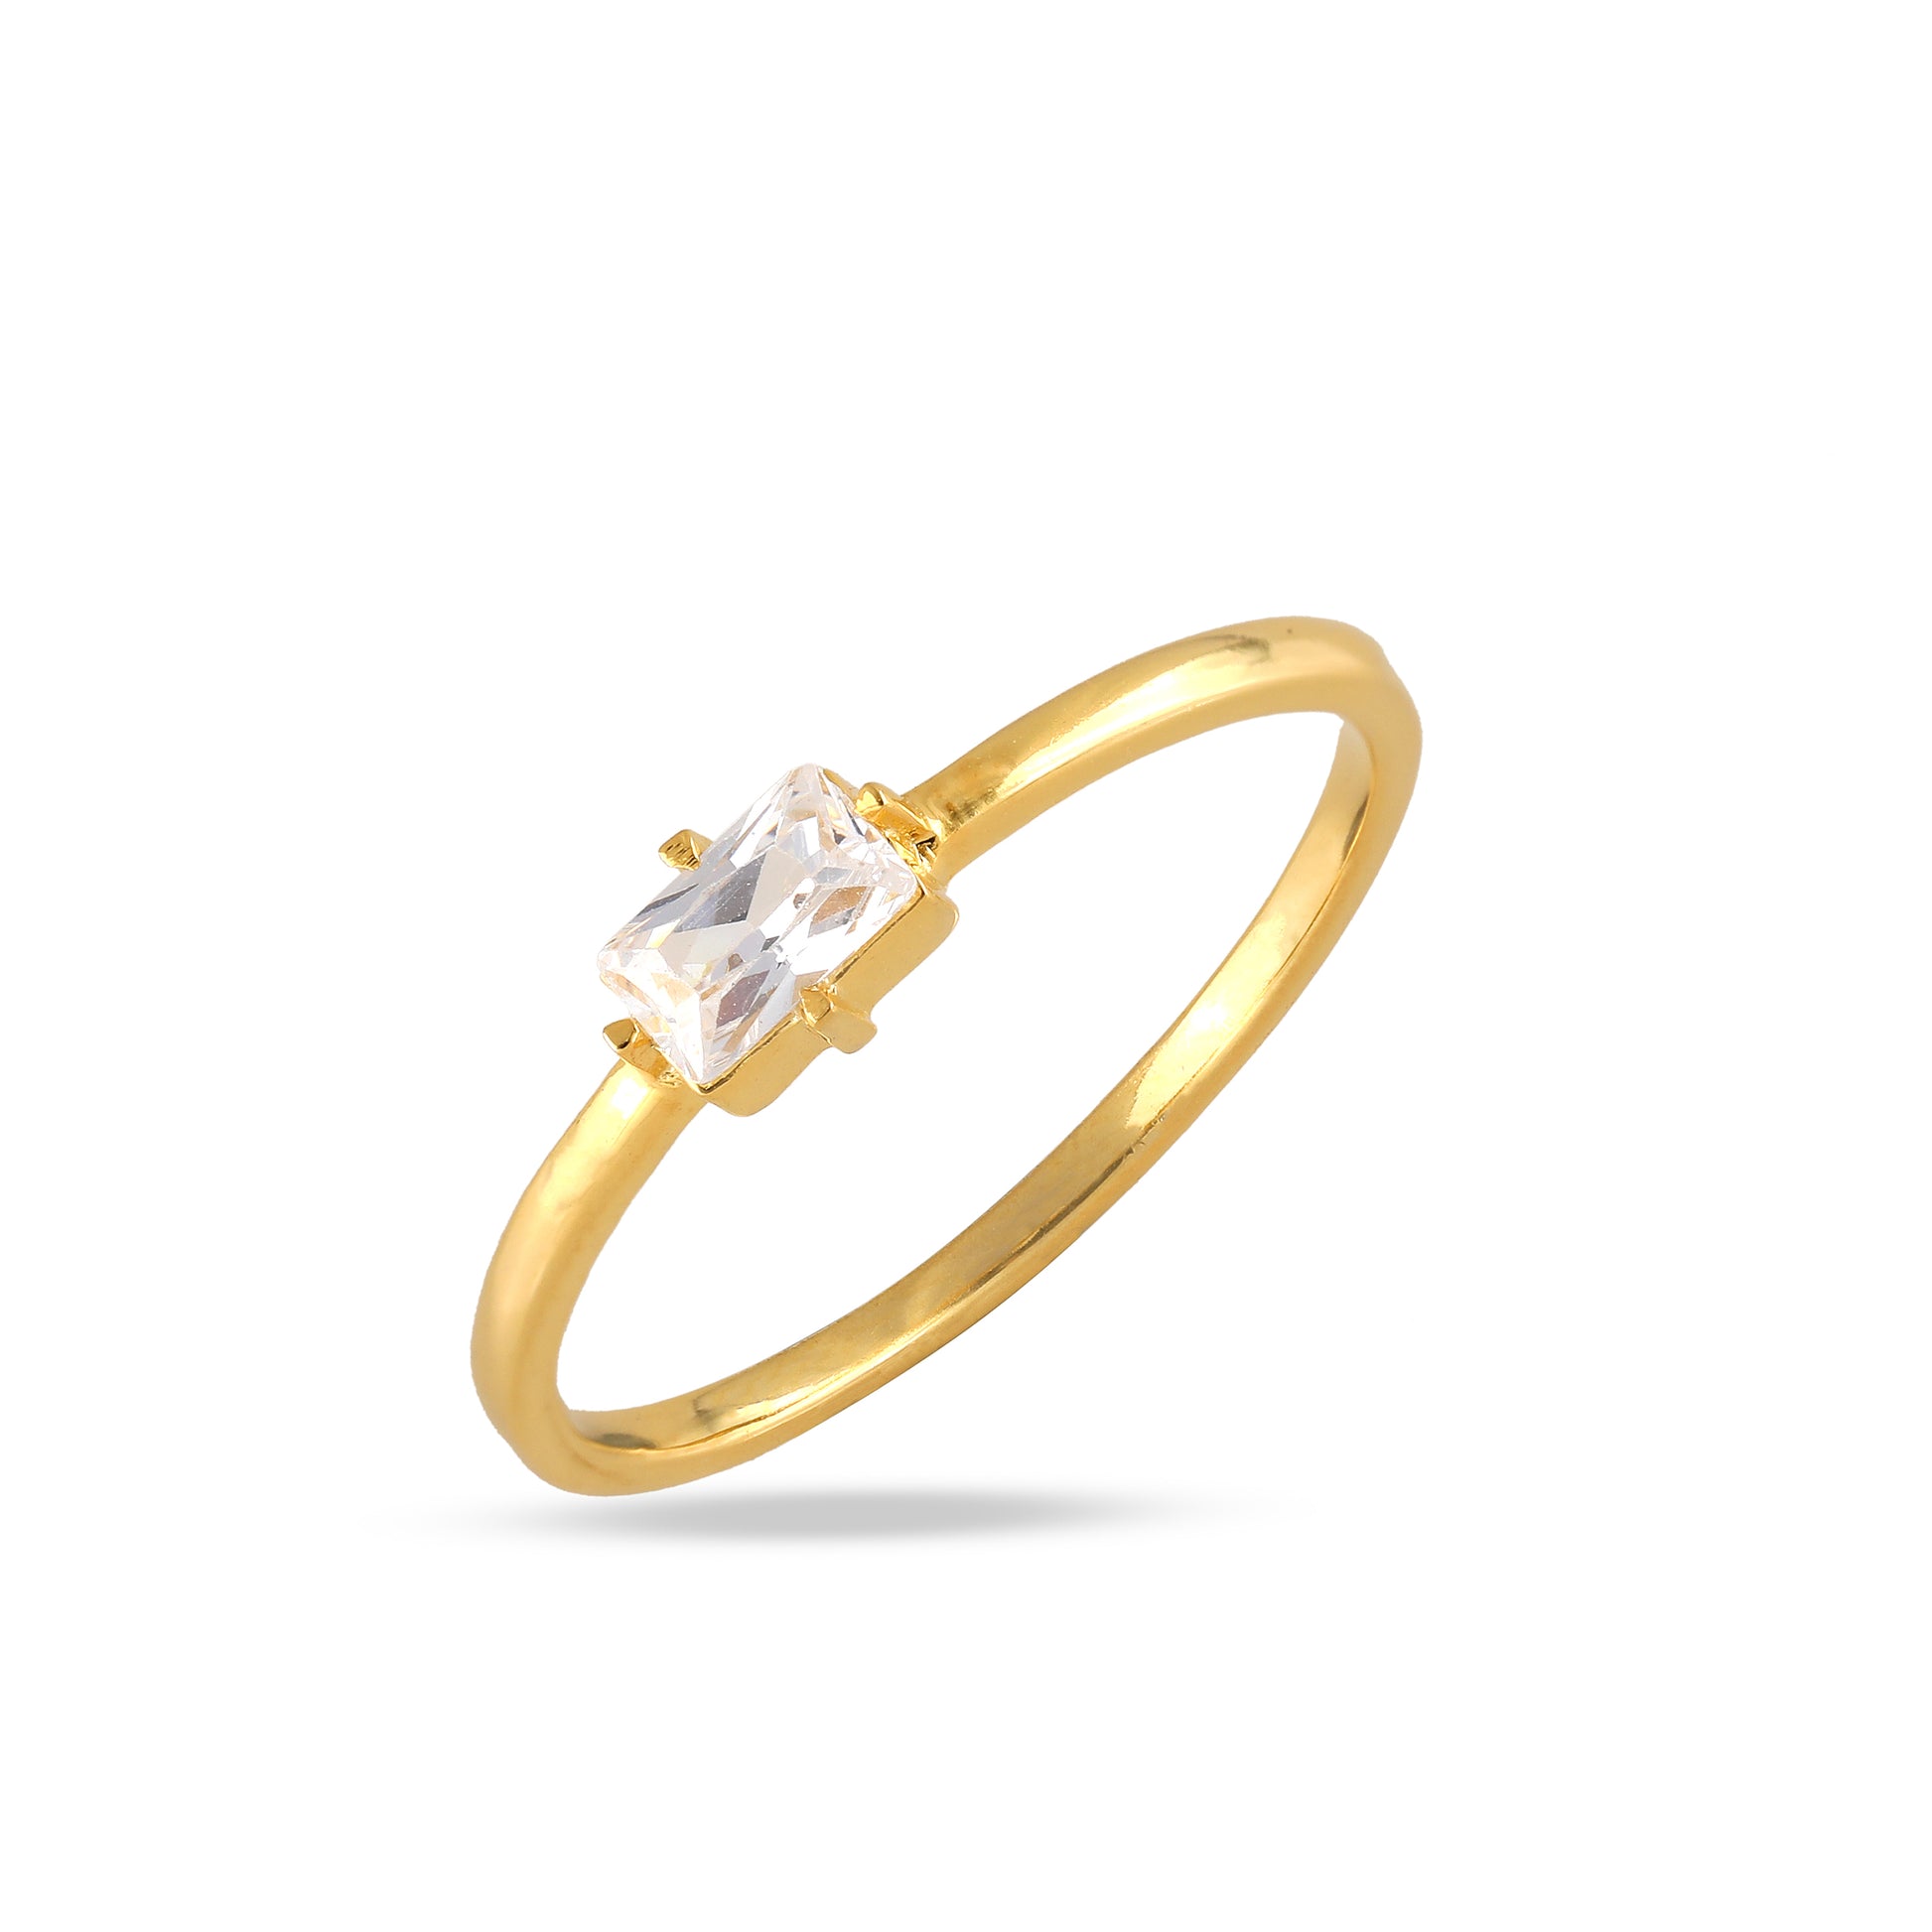 Yellow gold Radiant Cut Solitaire Diamond Ring